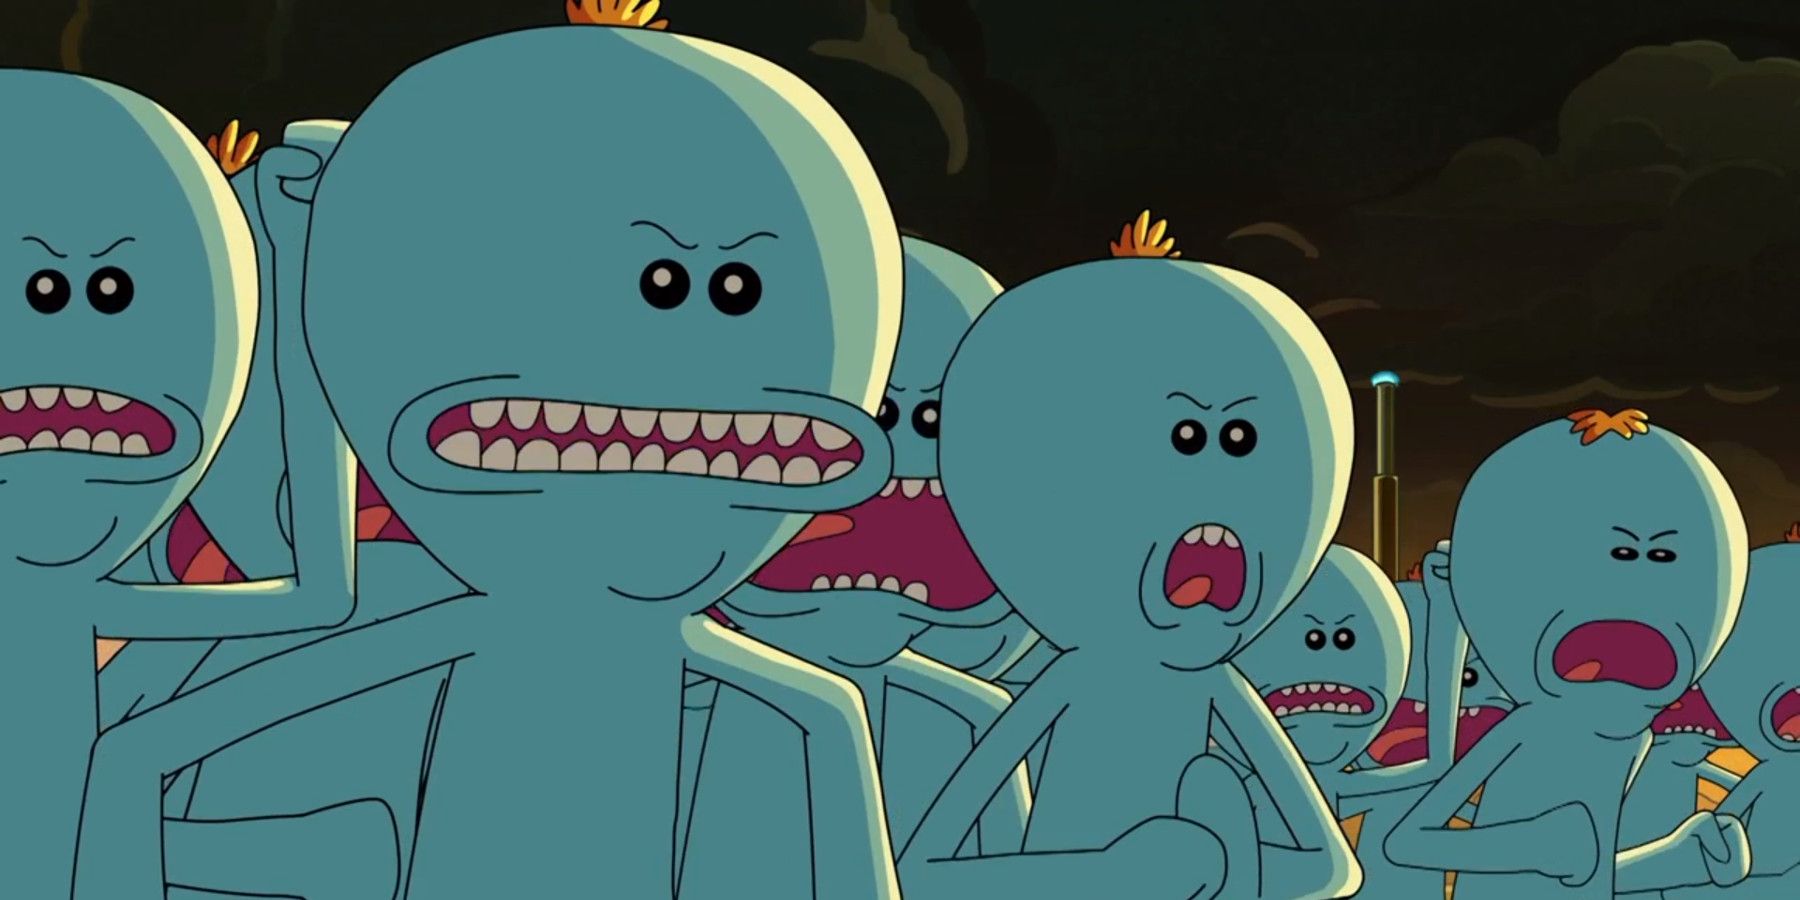 Rick and Morty x Mr. Meeseeks  Rick and morty, Morty, Mister meeseeks